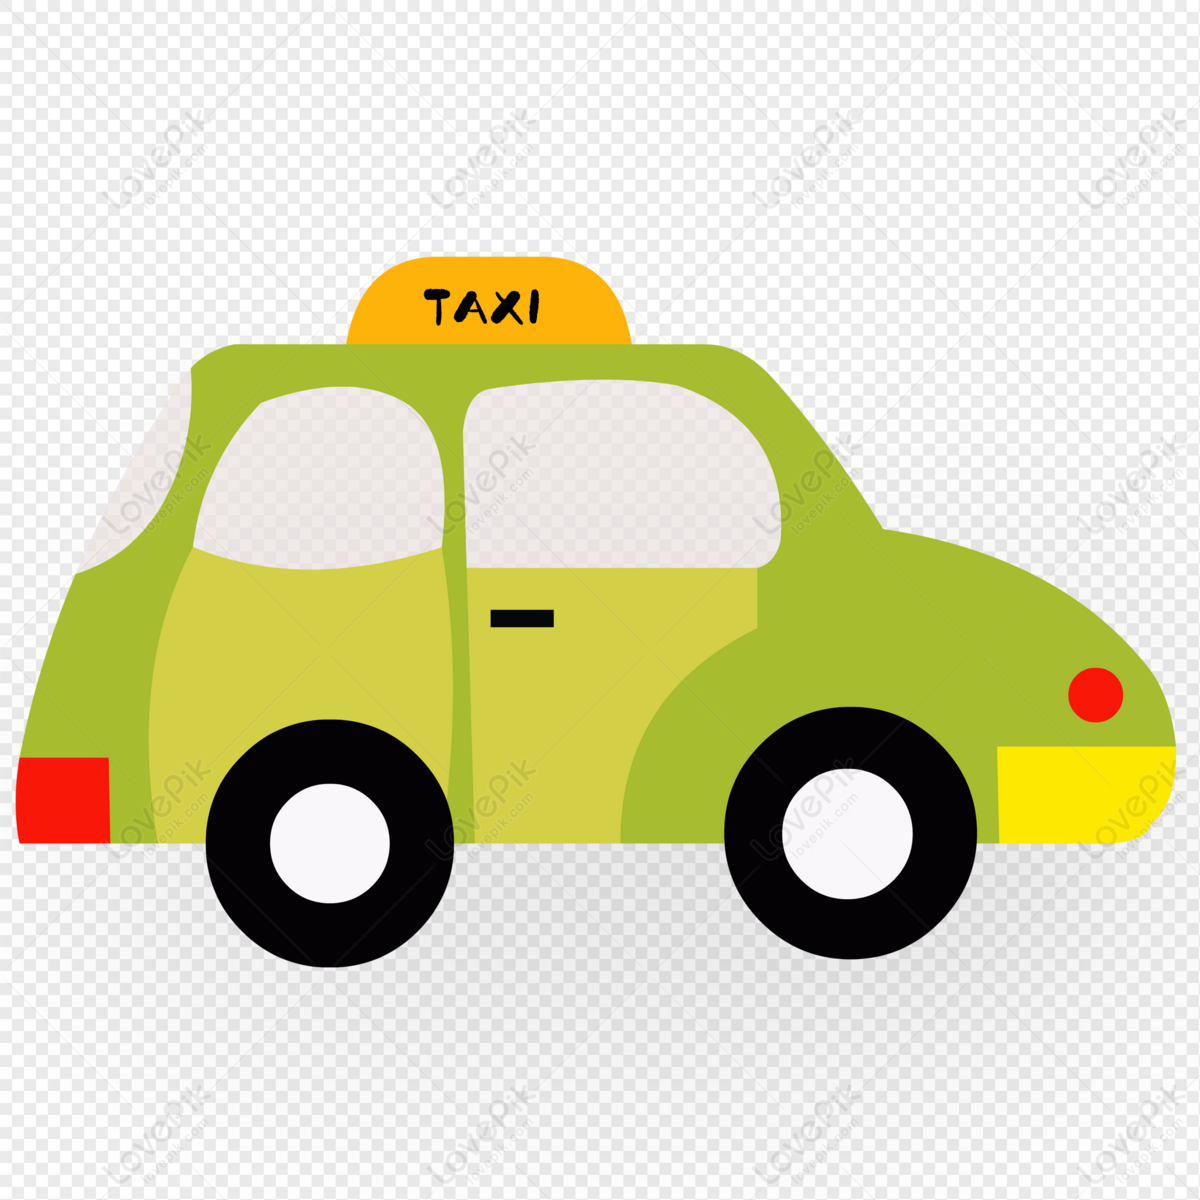 taxi clipart png